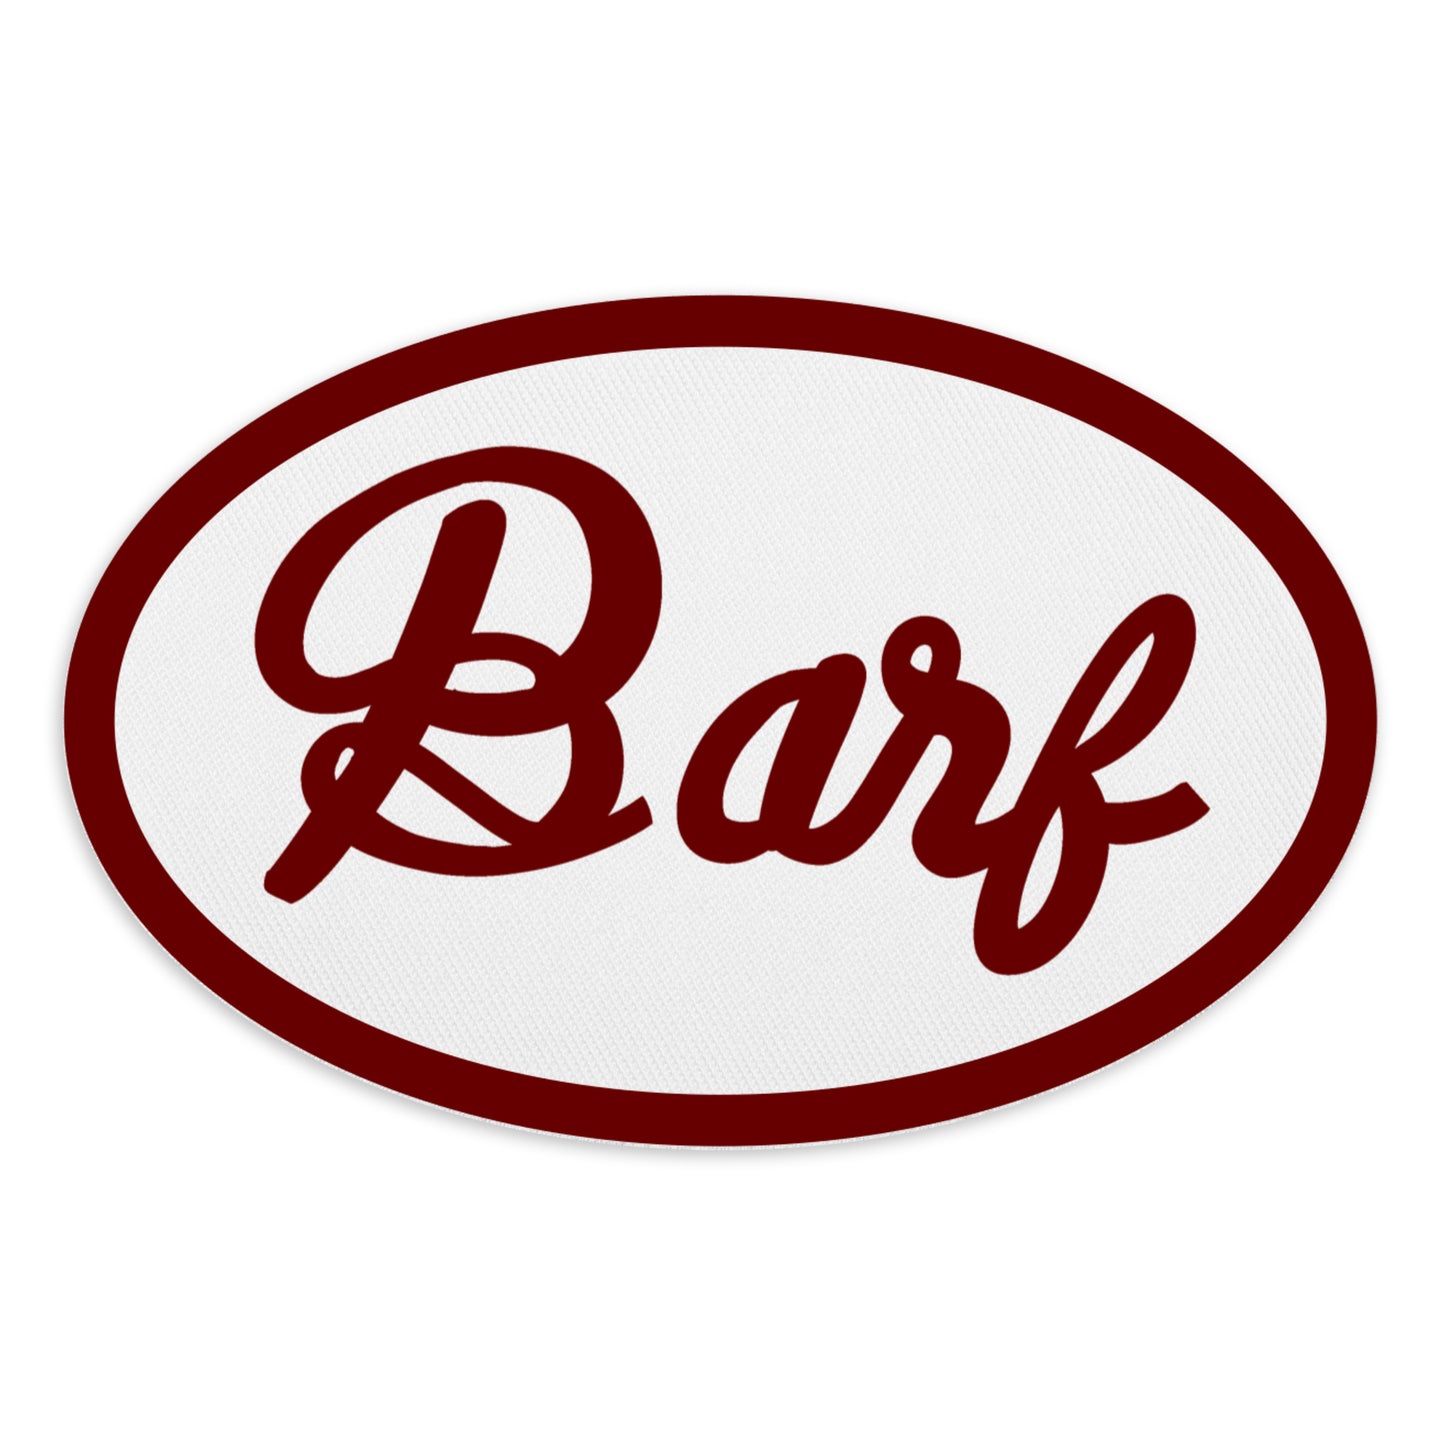 Barf oval patch